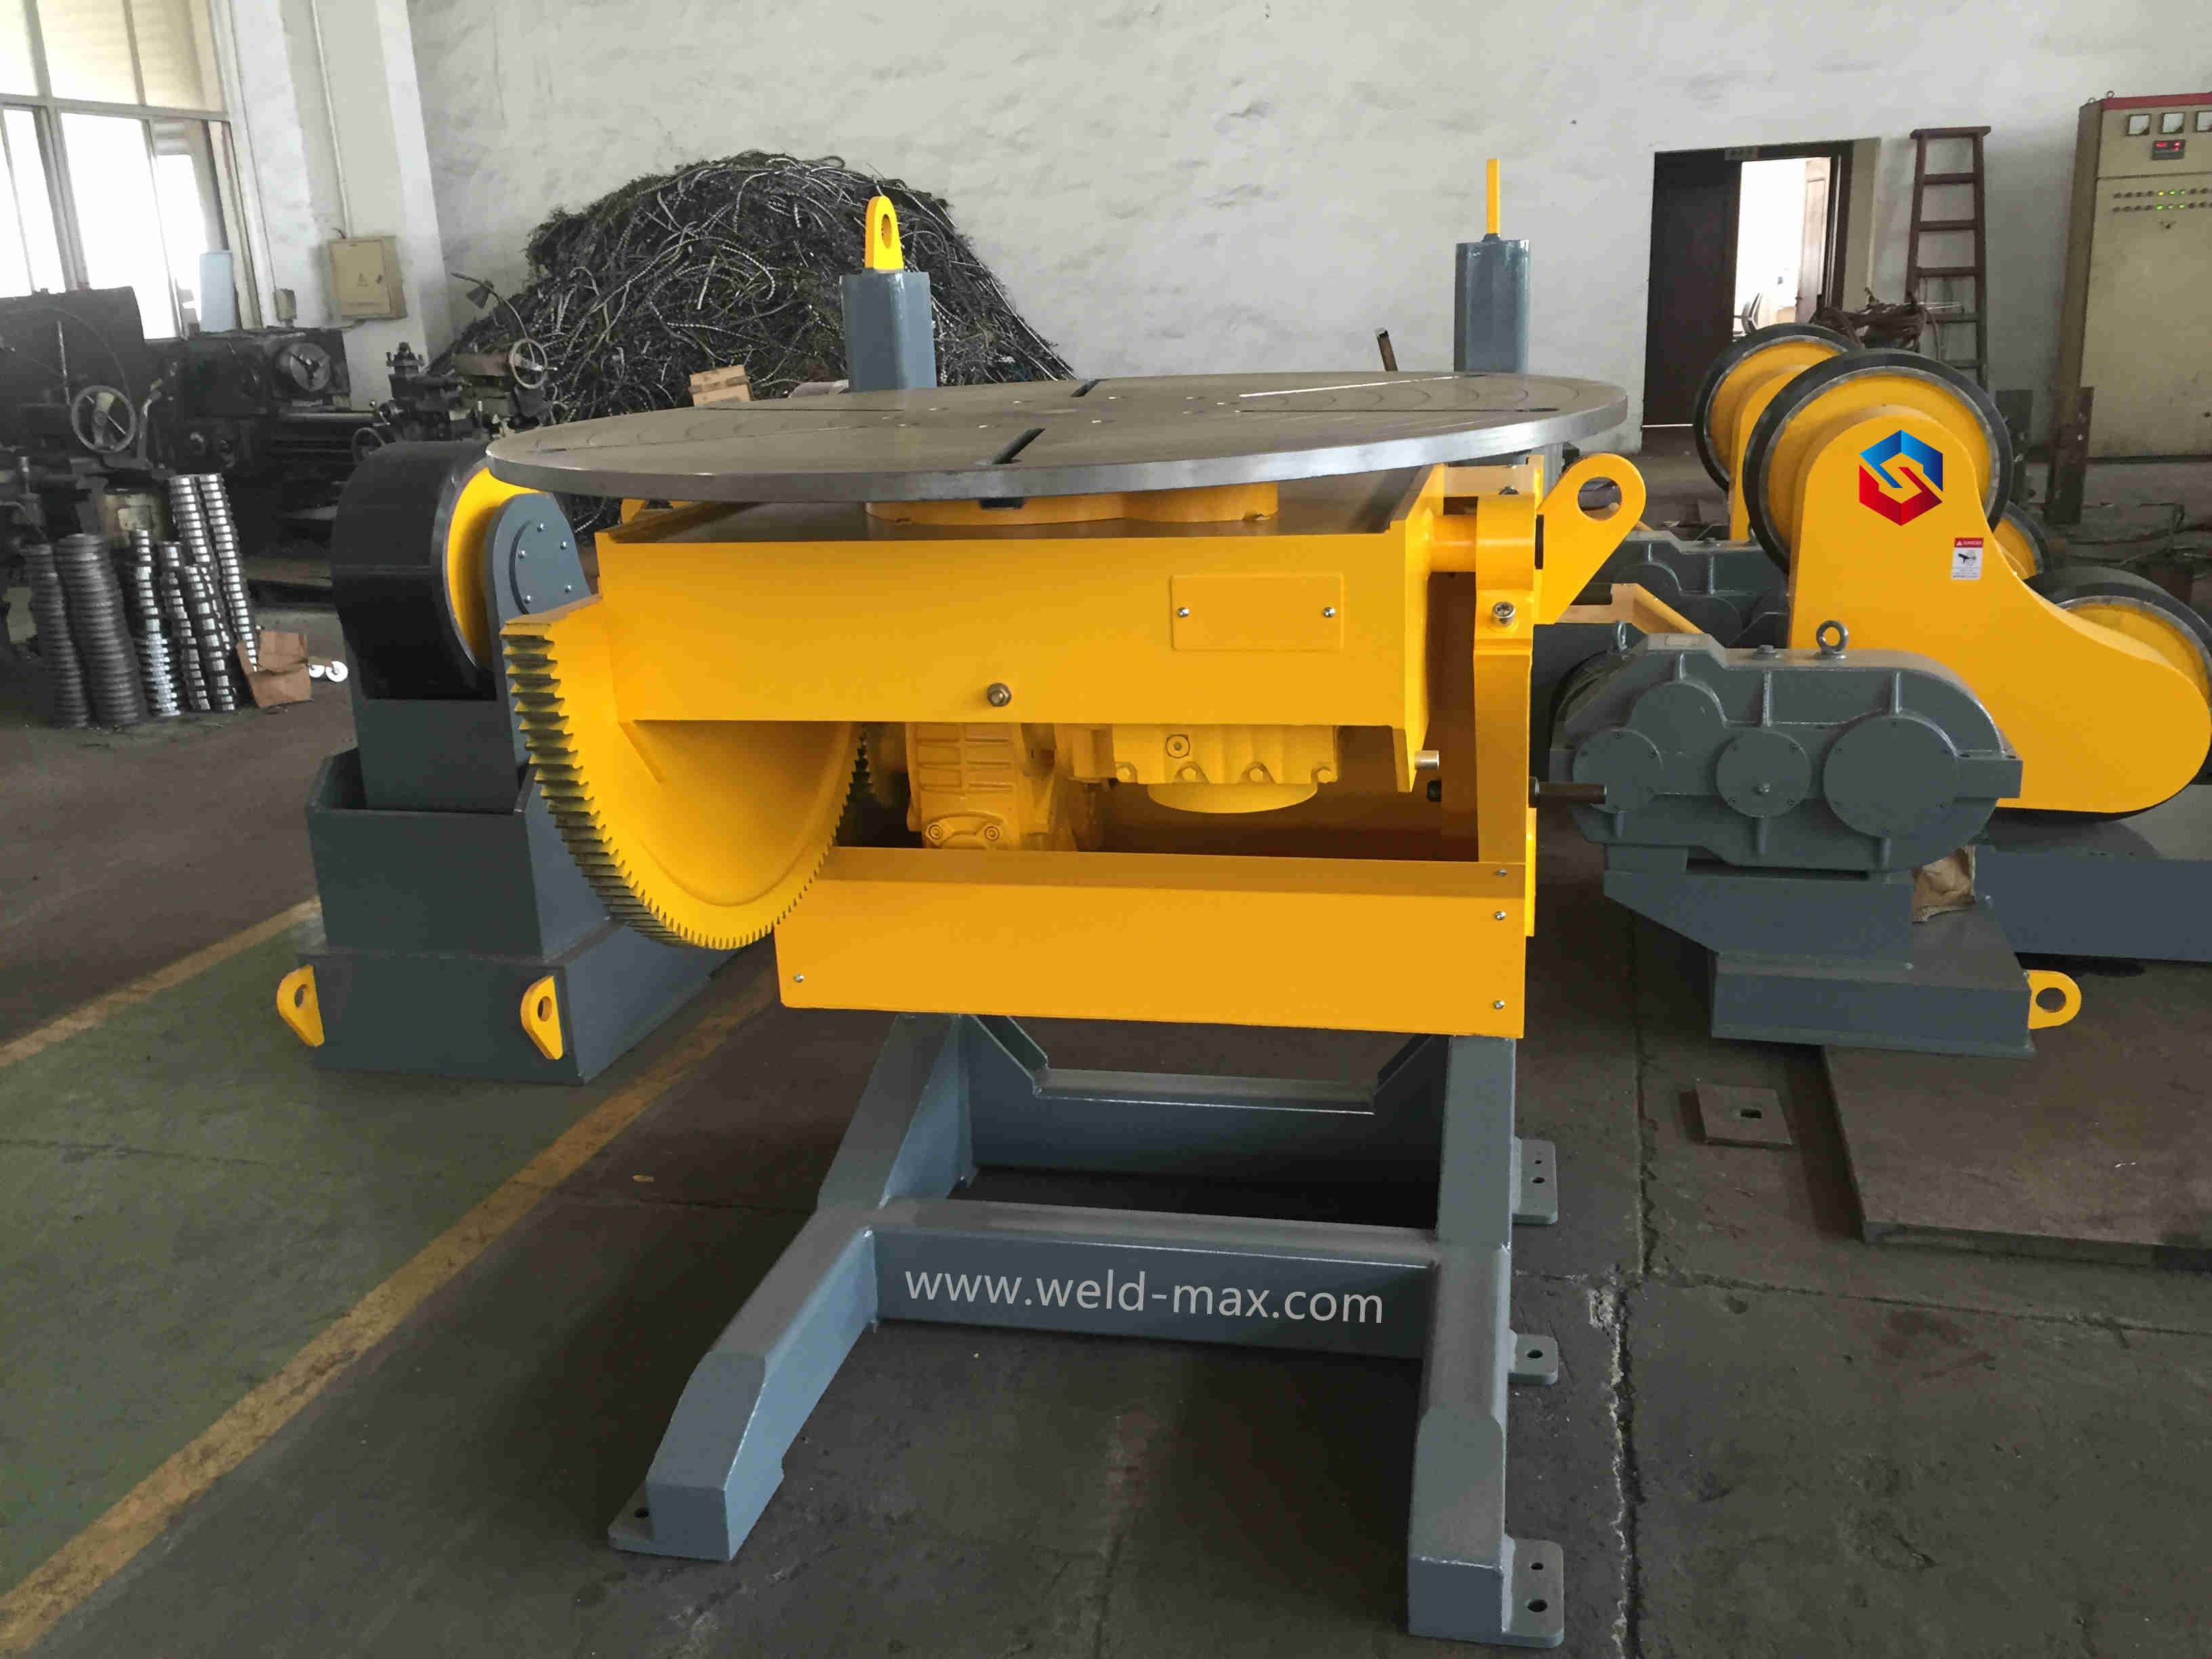 China Factory for 1×1 Welding Machine Manipulator - 30T Yellow Elevating Welding Positoner With Vertaical Turning Table And 5 JAWS Chuck – Sanlian